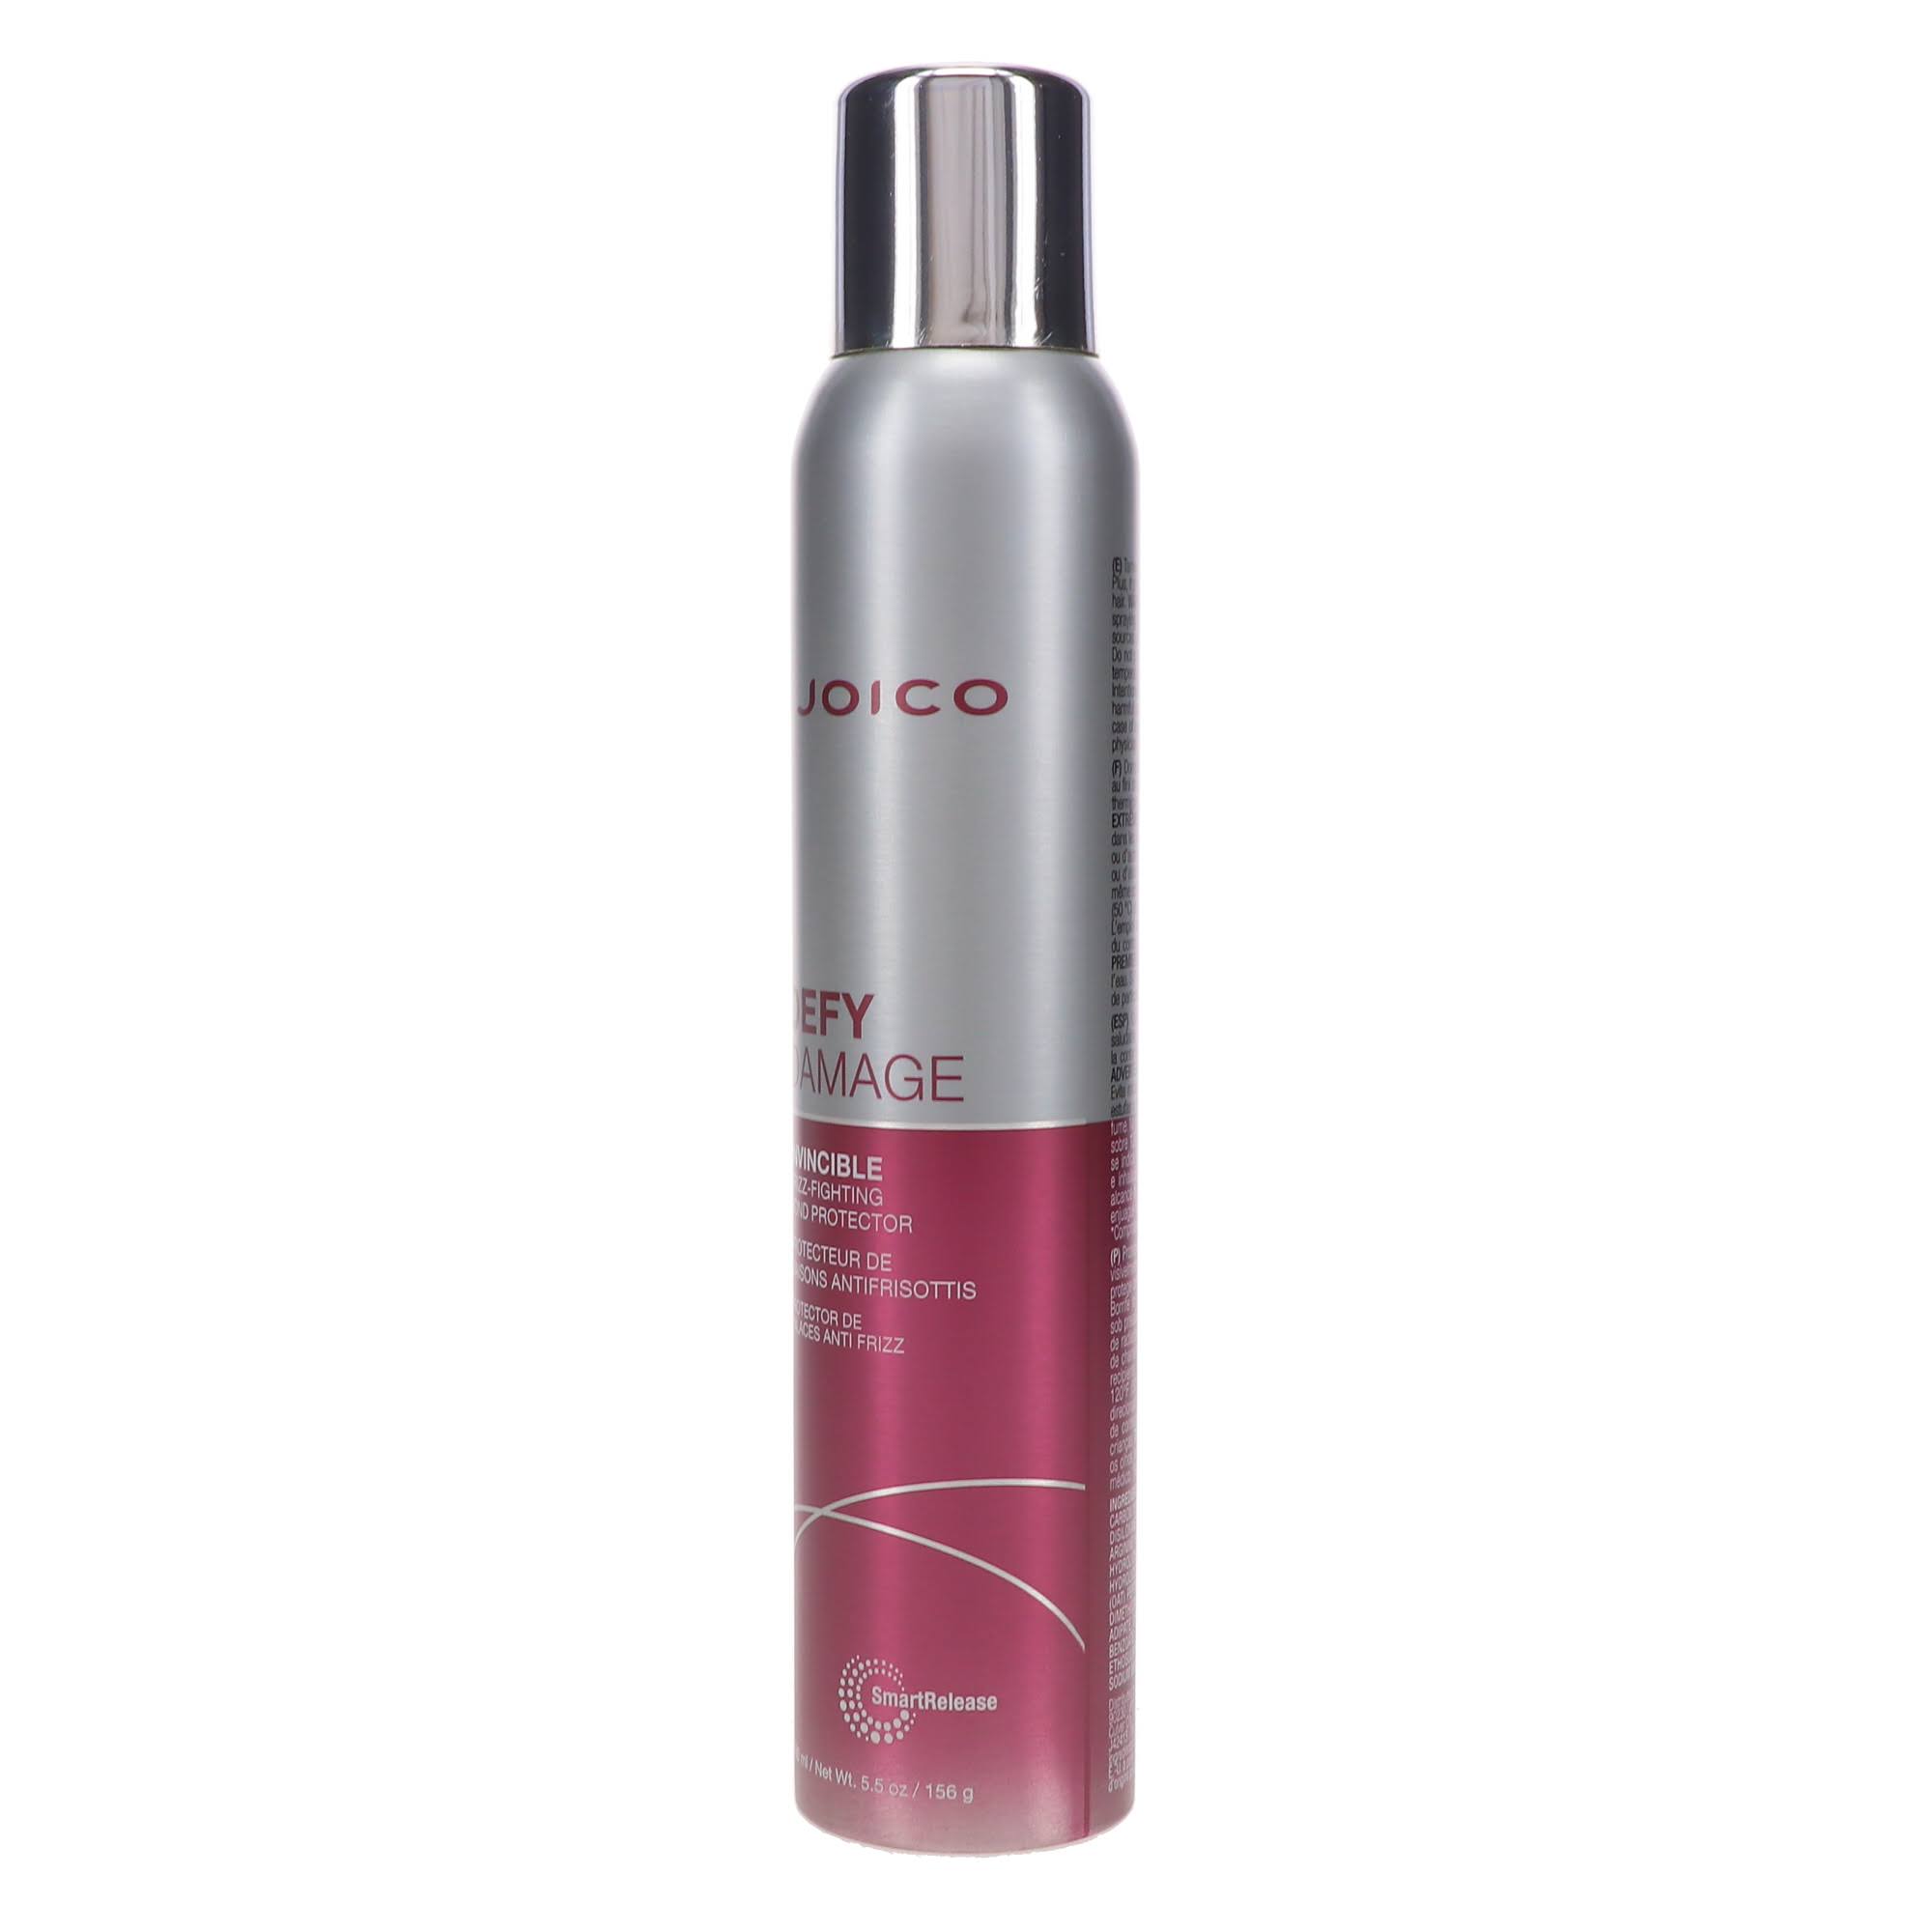 JOICO Defy Damage Invincible Frizz-Fighting Bond Protector